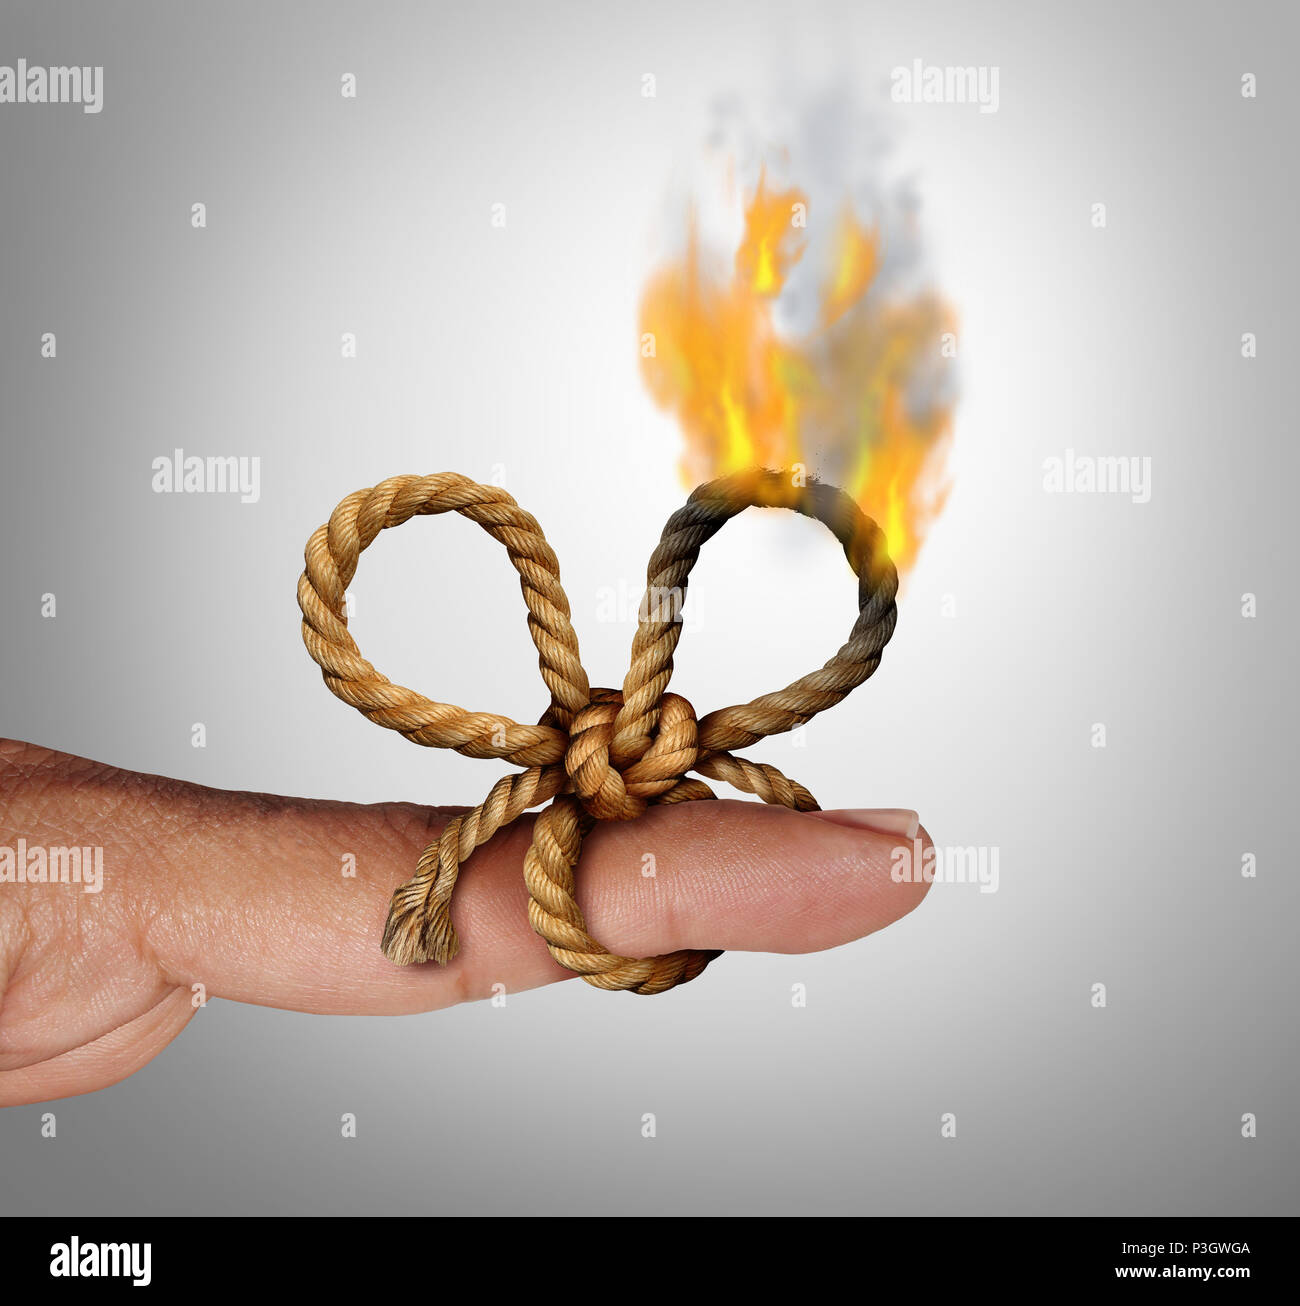 Losing memories as a burning remember knot and reminder symbol as a string tied on a finger forgetting a future planned event. Stock Photo